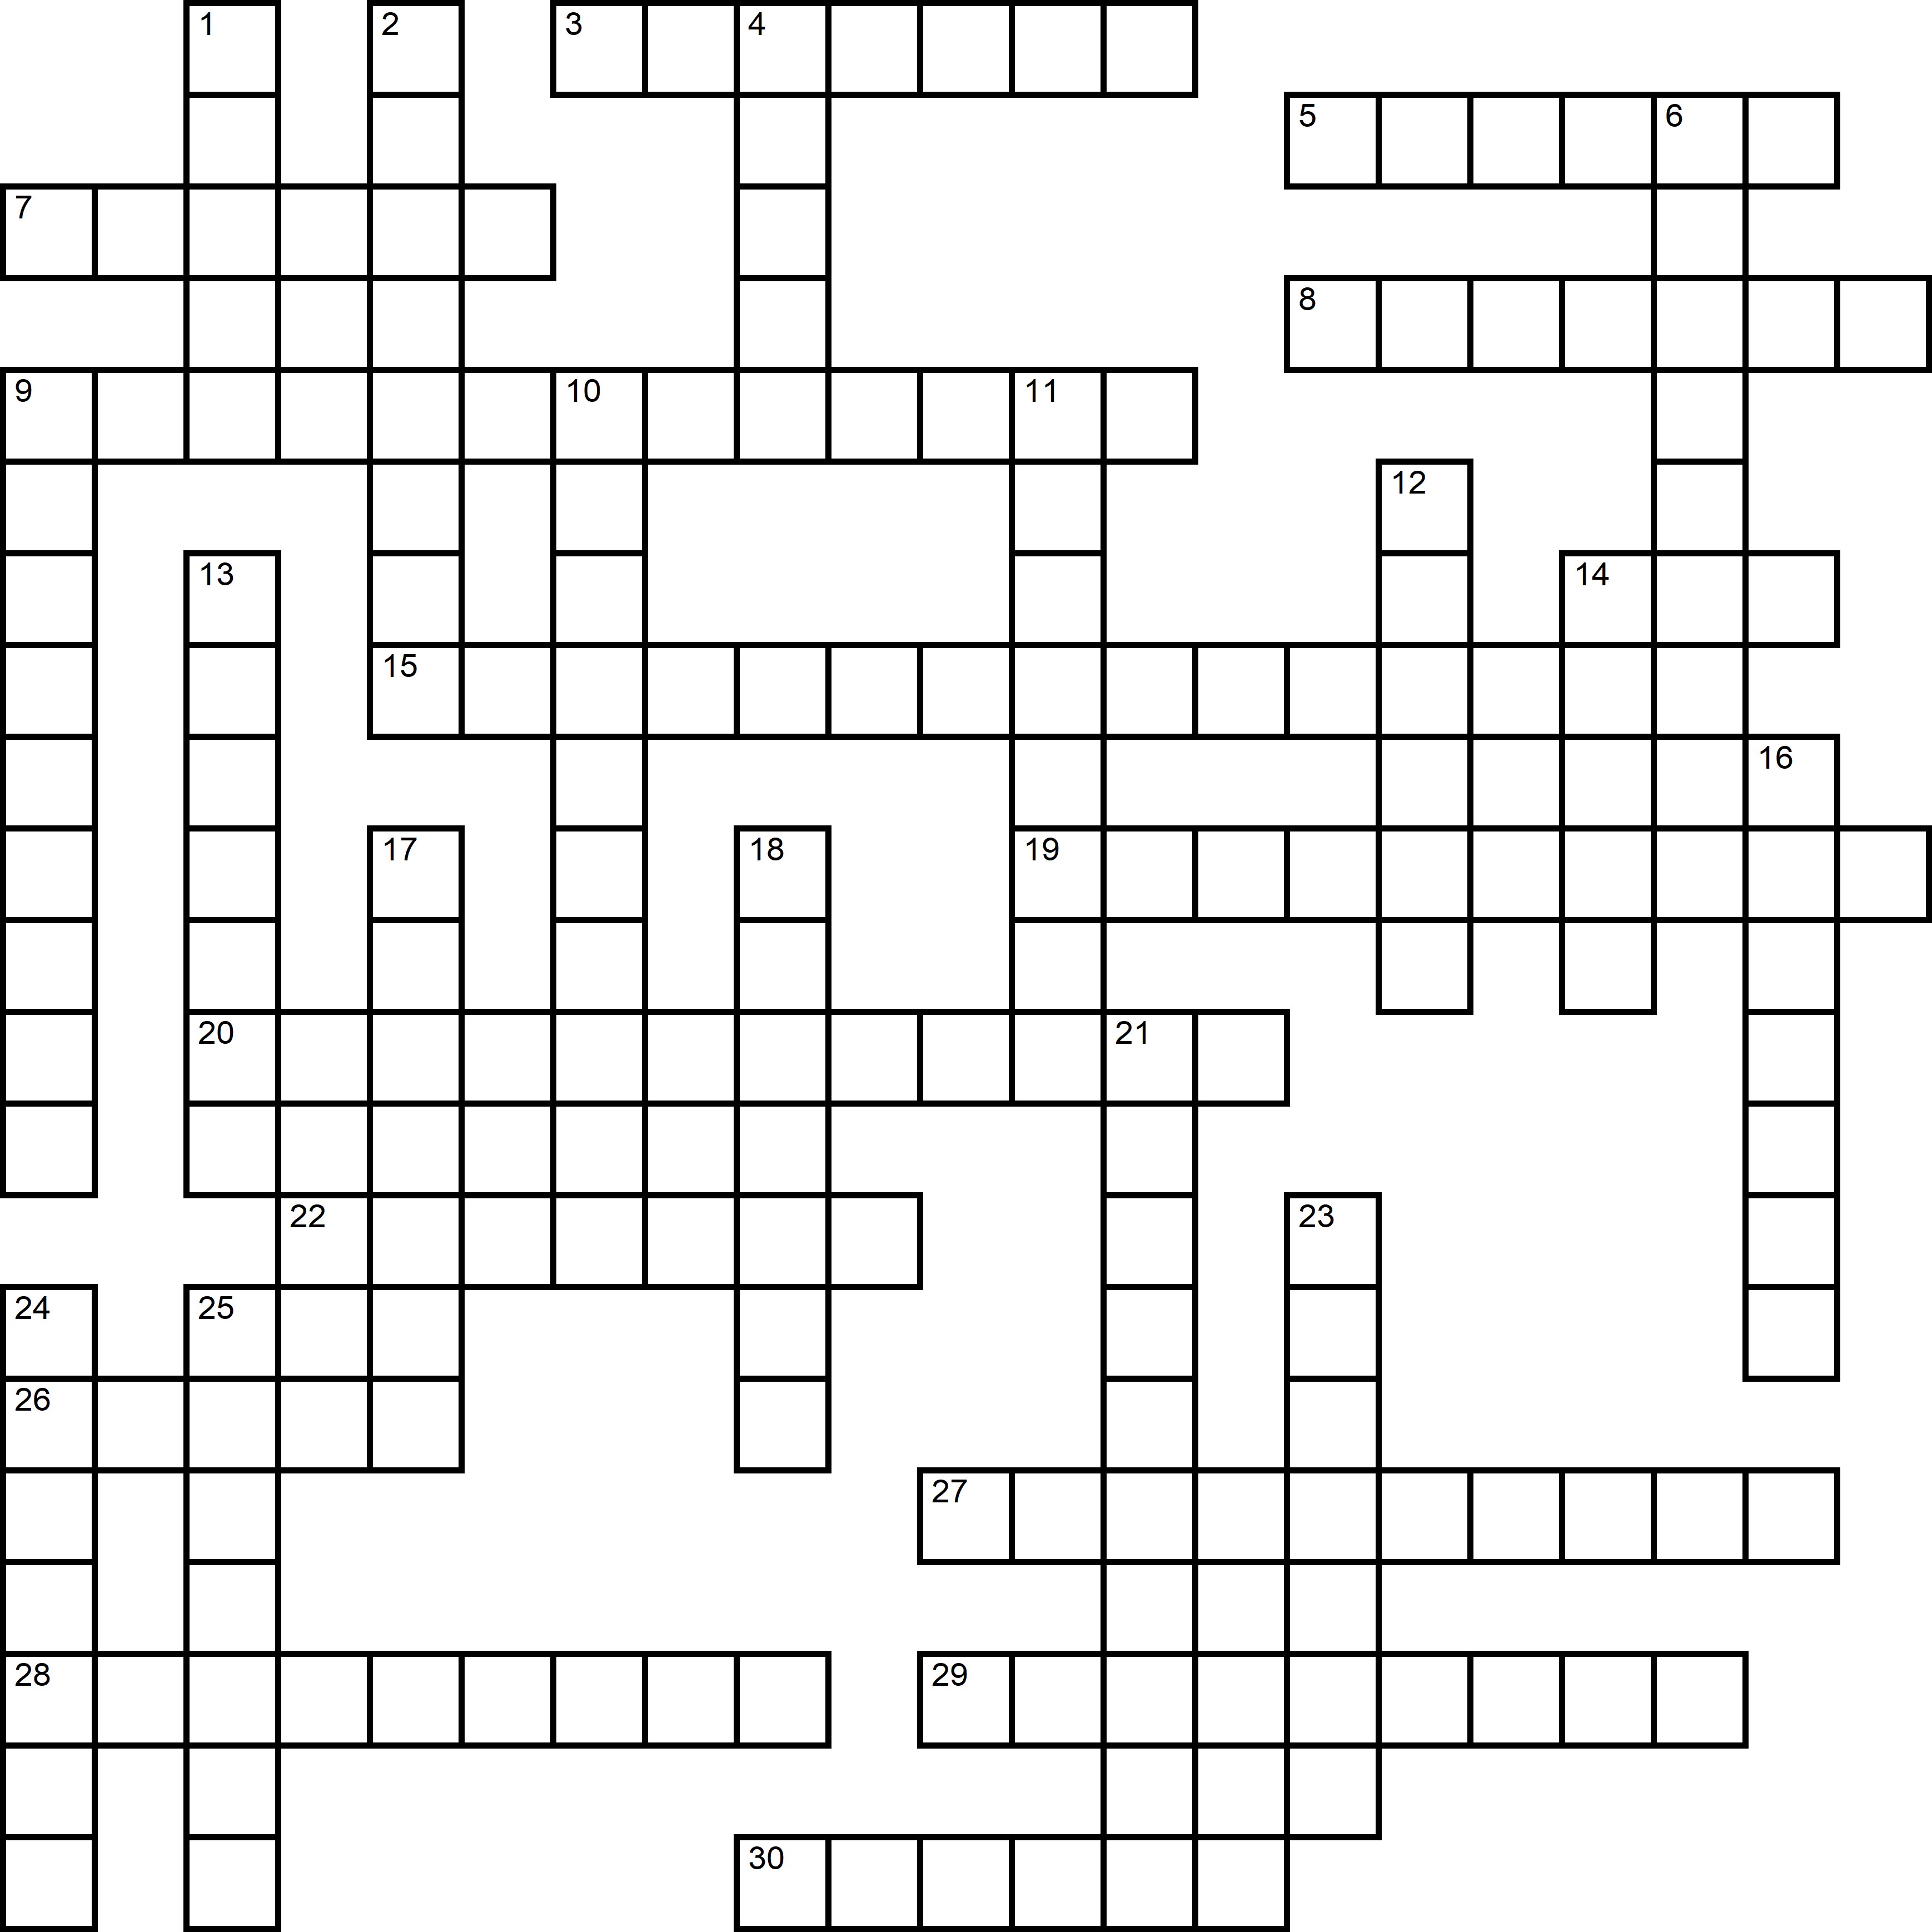 Easy Crossword About Mothers Day